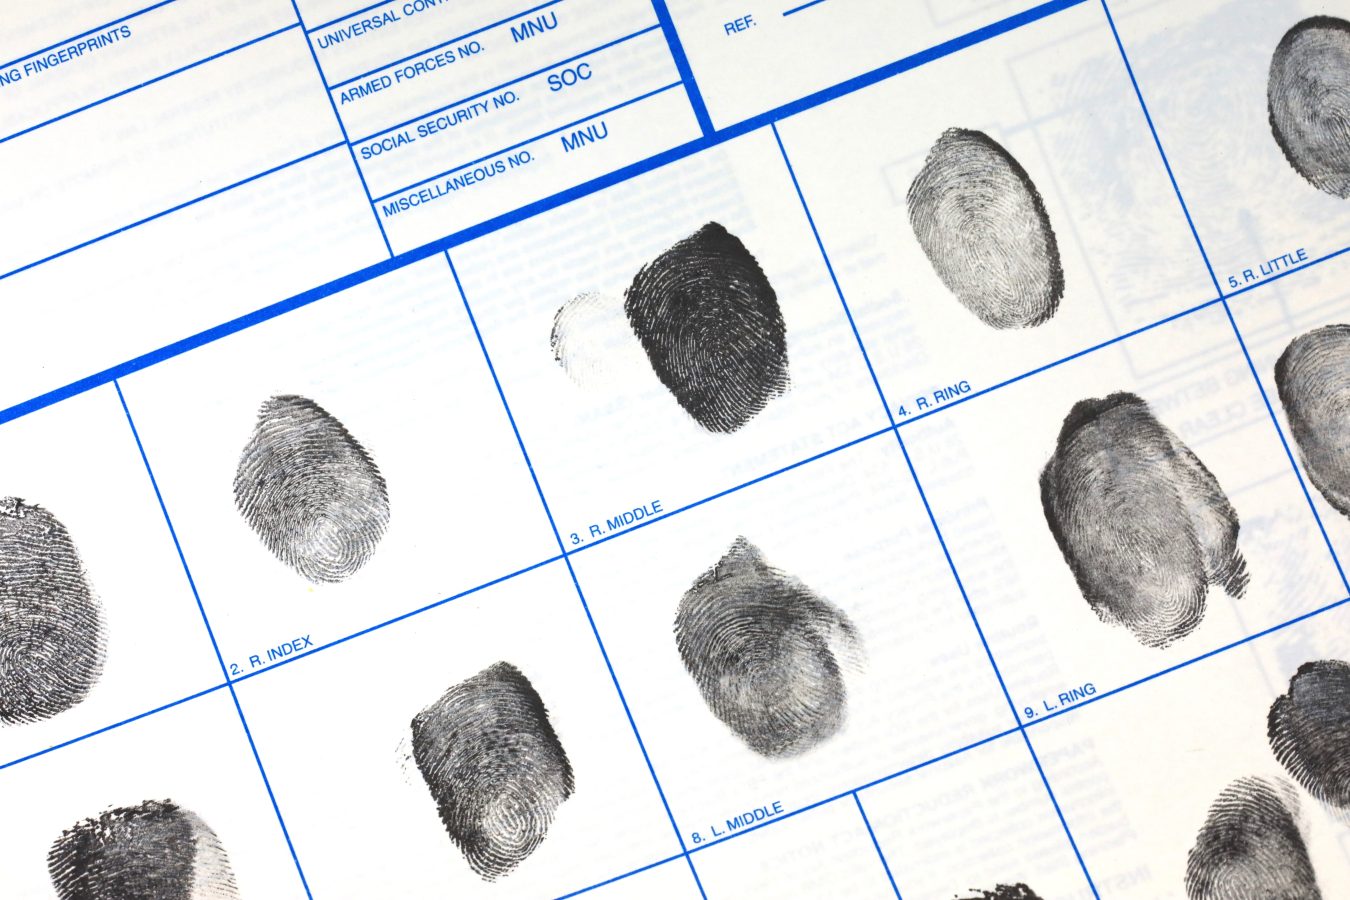 Fingerprinting is part of biometrics when filing a visa application to come to the US.